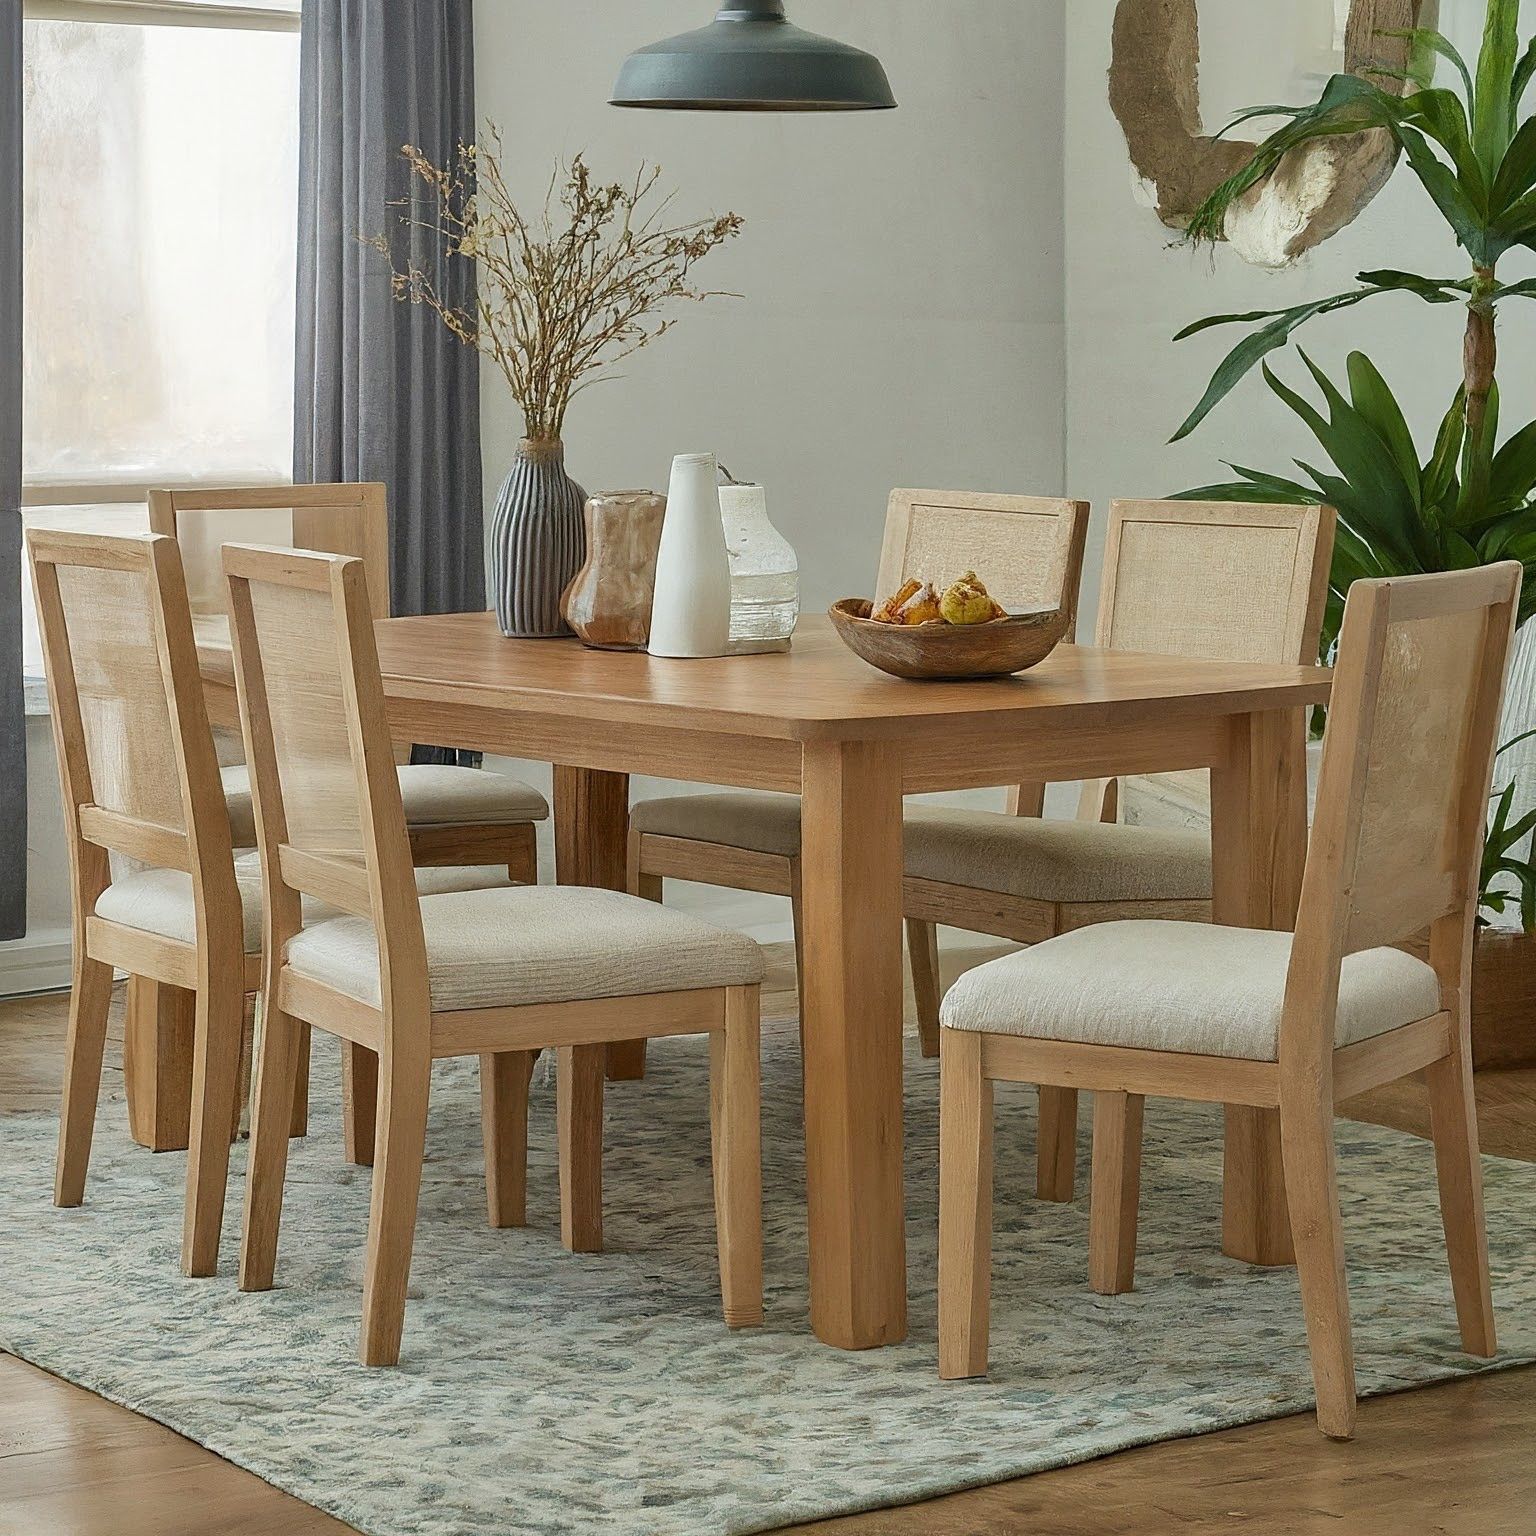 Set of 6  - Natural Coastal Solid Wood Square Rattan Cane Back Dining Chairs w/ Beige Linen Cushions [NEW IN BOX] **Retails for $750 [NO TABLE]